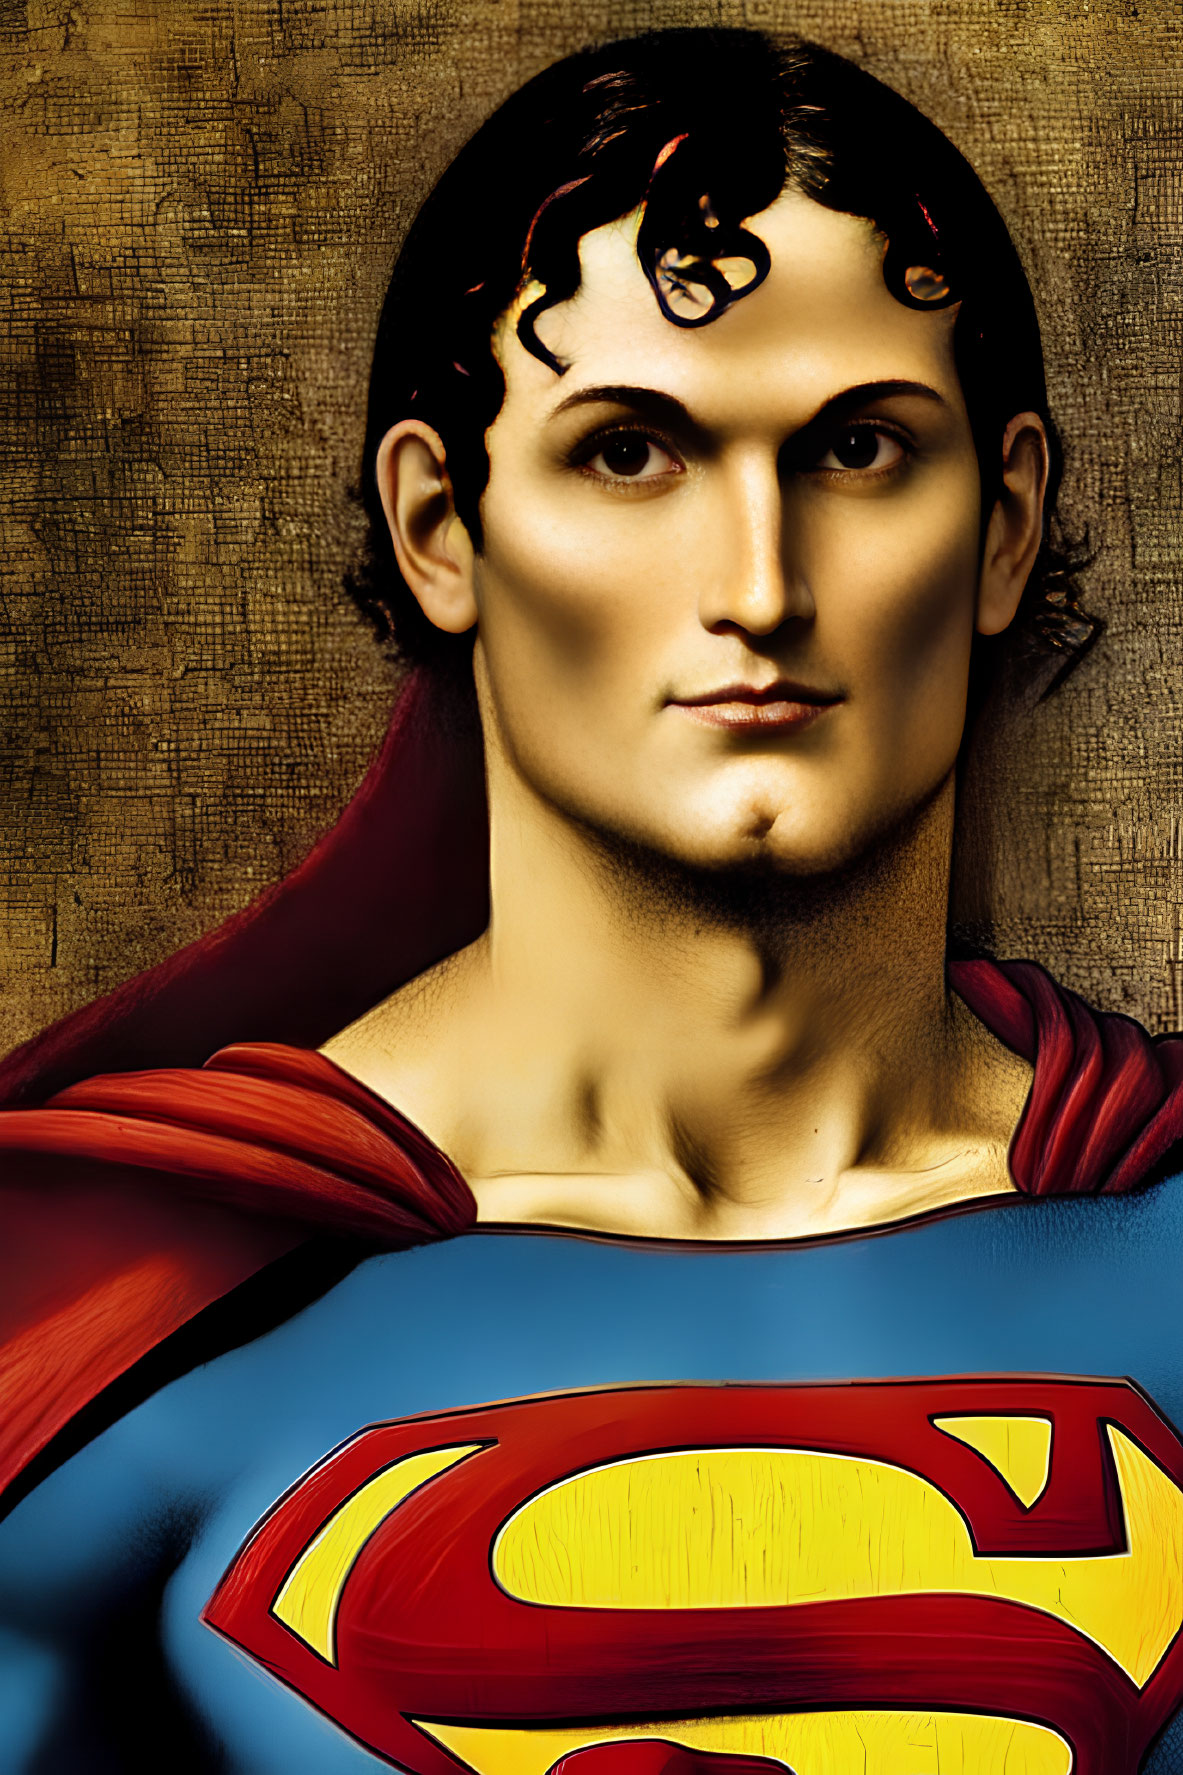 Superman in Red and Blue Costume with 'S' Emblem on Golden Textured Background